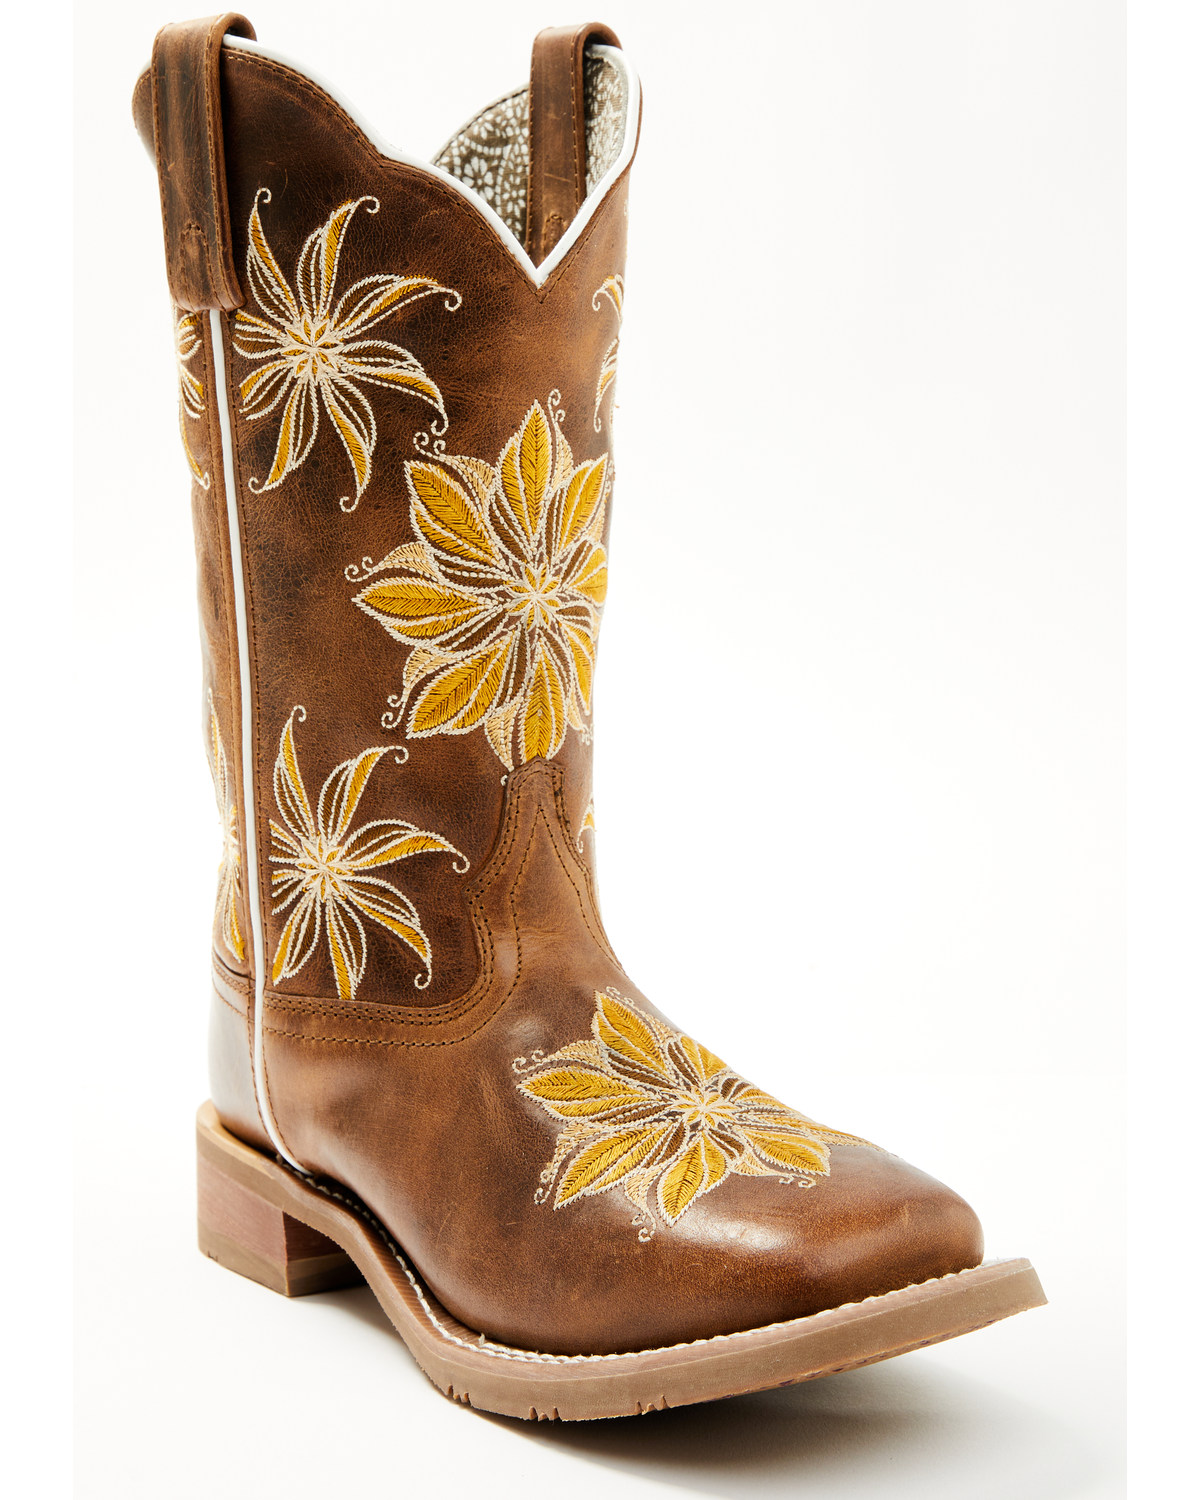 Laredo Women's Melrose Floral Western Boots - Broad Square Toe